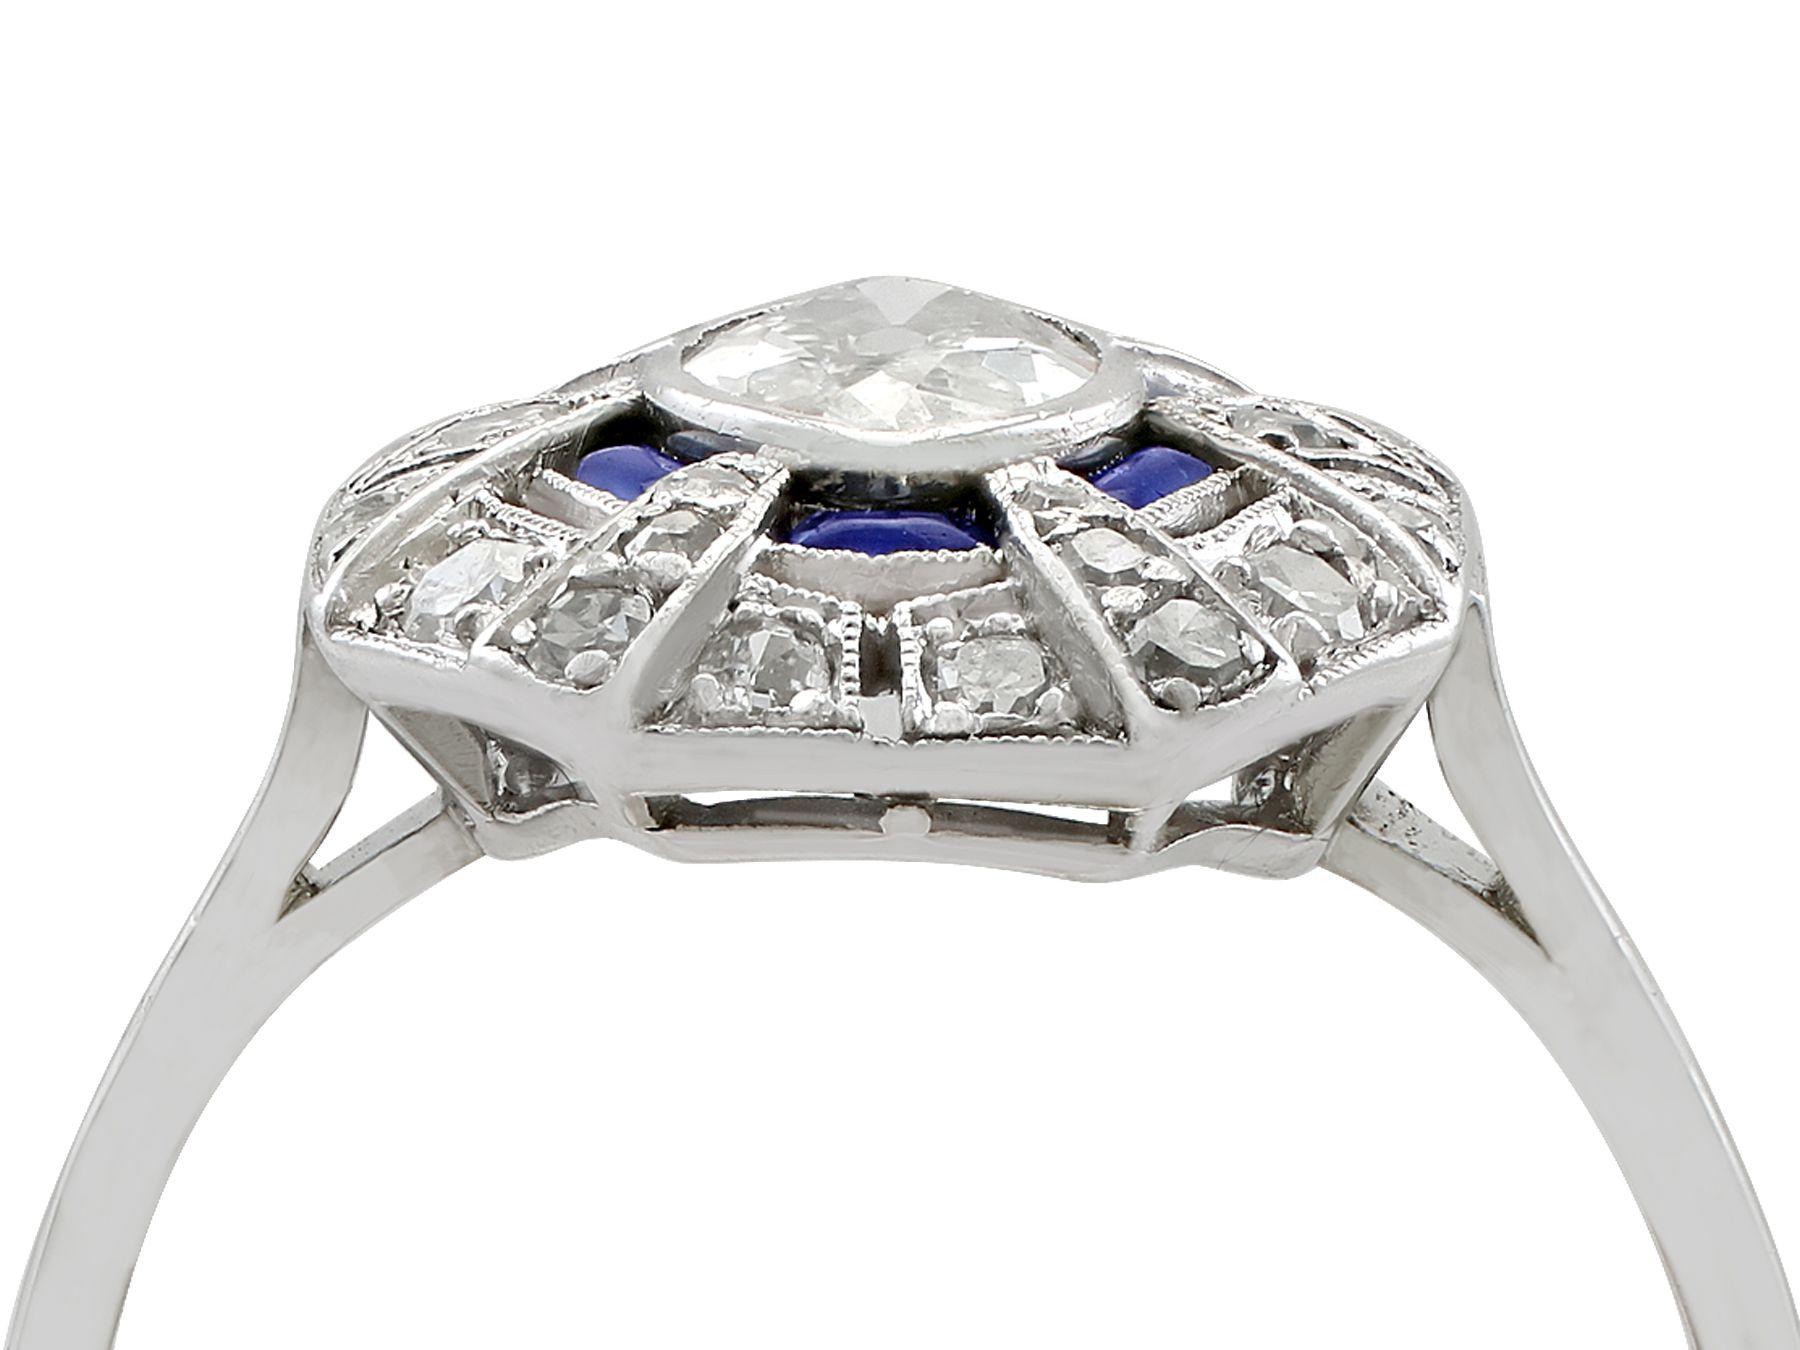 A stunning antique French Art Deco 1.39 carat diamond and 0.33 carat sapphire, platinum dress ring; part of our diverse antique jewelry and estate jewelry collections.

This stunning, fine and impressive antique sapphire and diamond ring has been